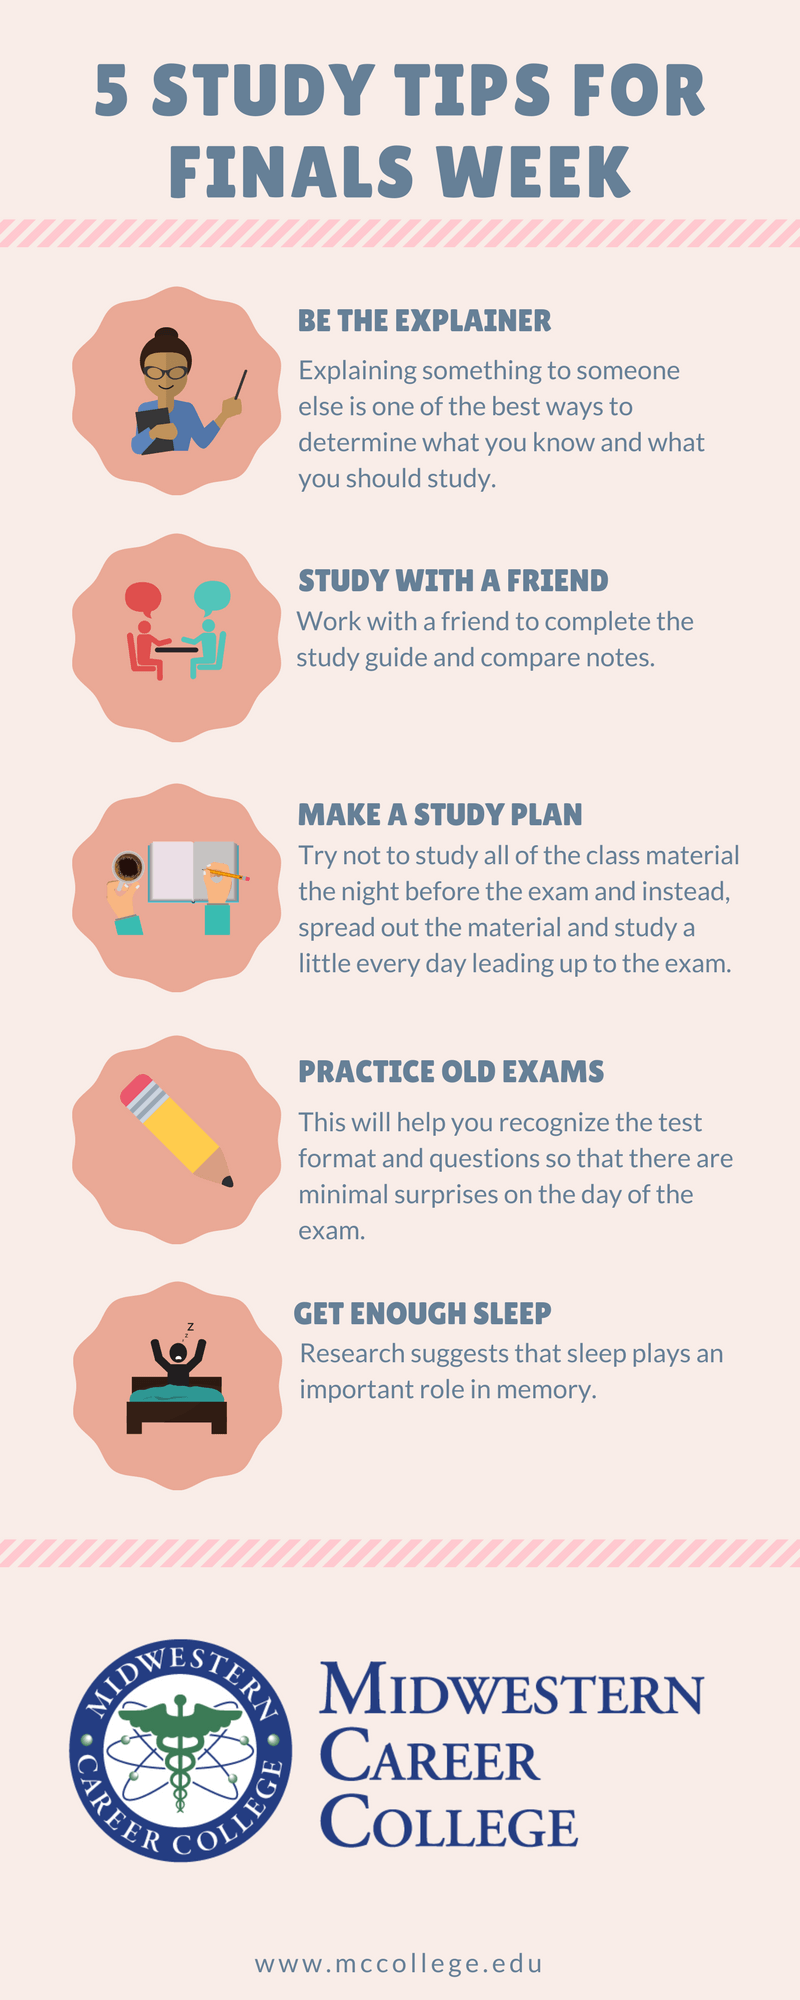 5 Study Tips for Finals Week